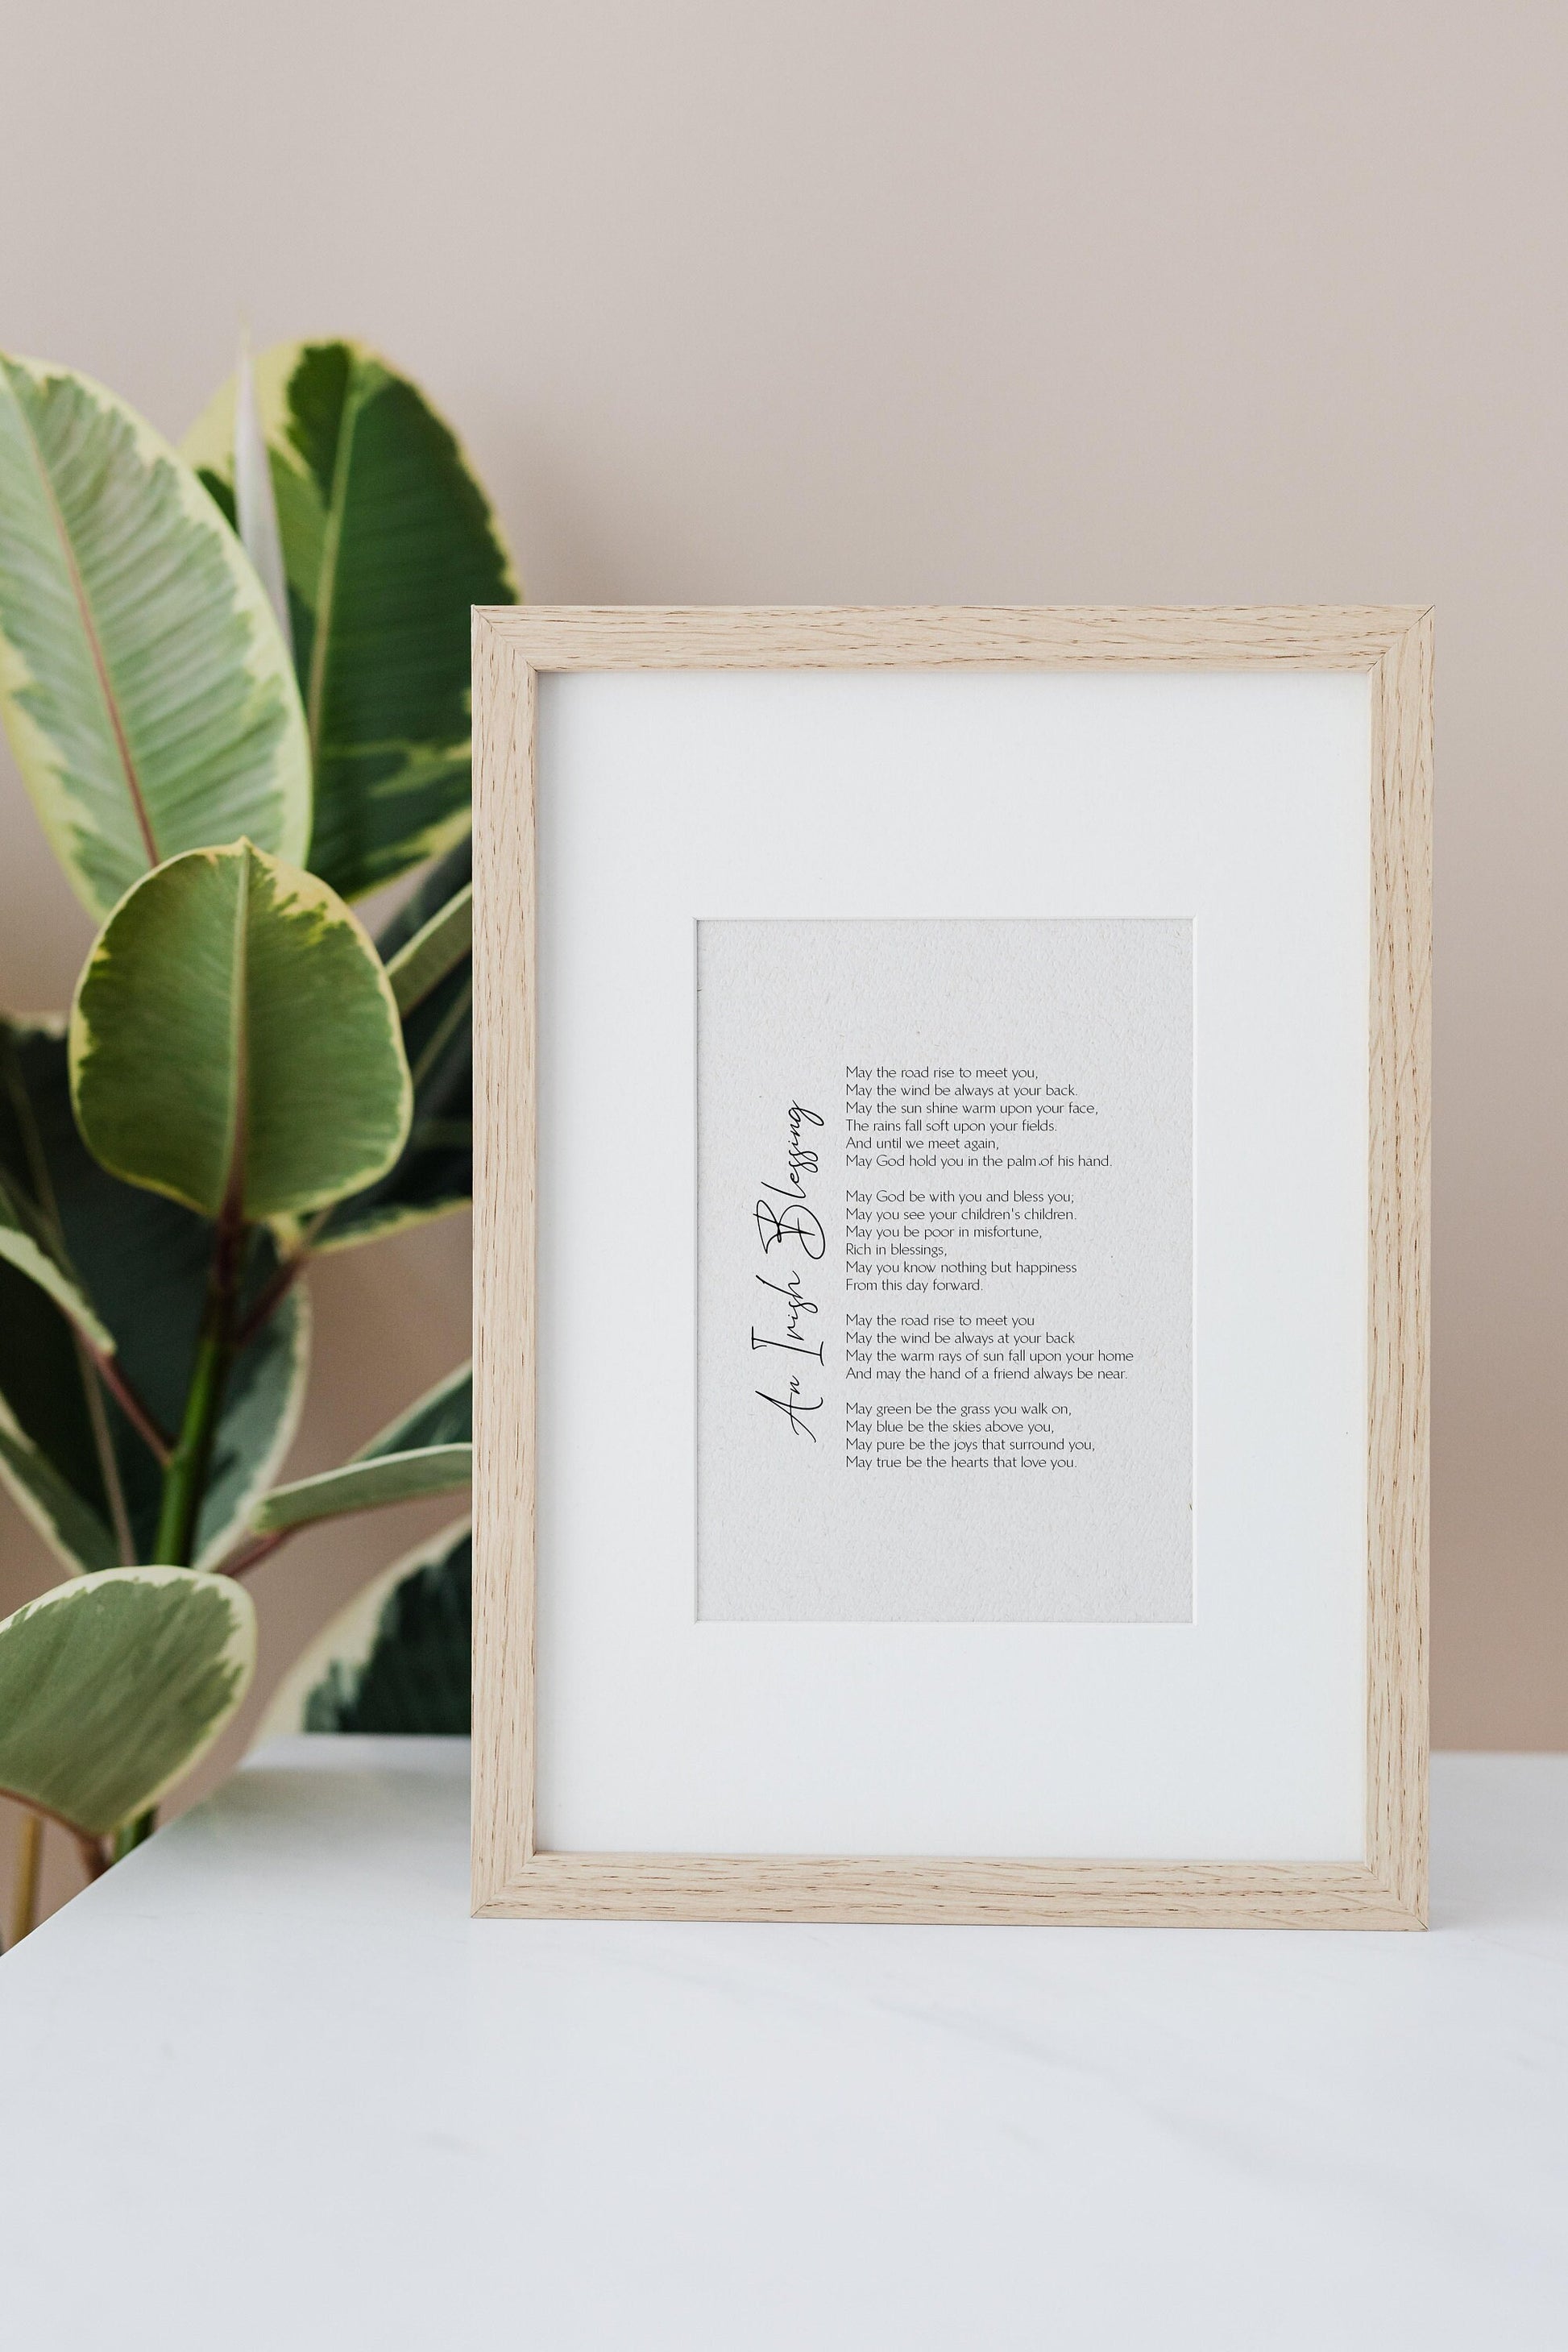 An Irish Blessing Print Framed - Calligraphy Print - Traditional Irish Gift for the Home - Irish Blessing Poem - House warming gift